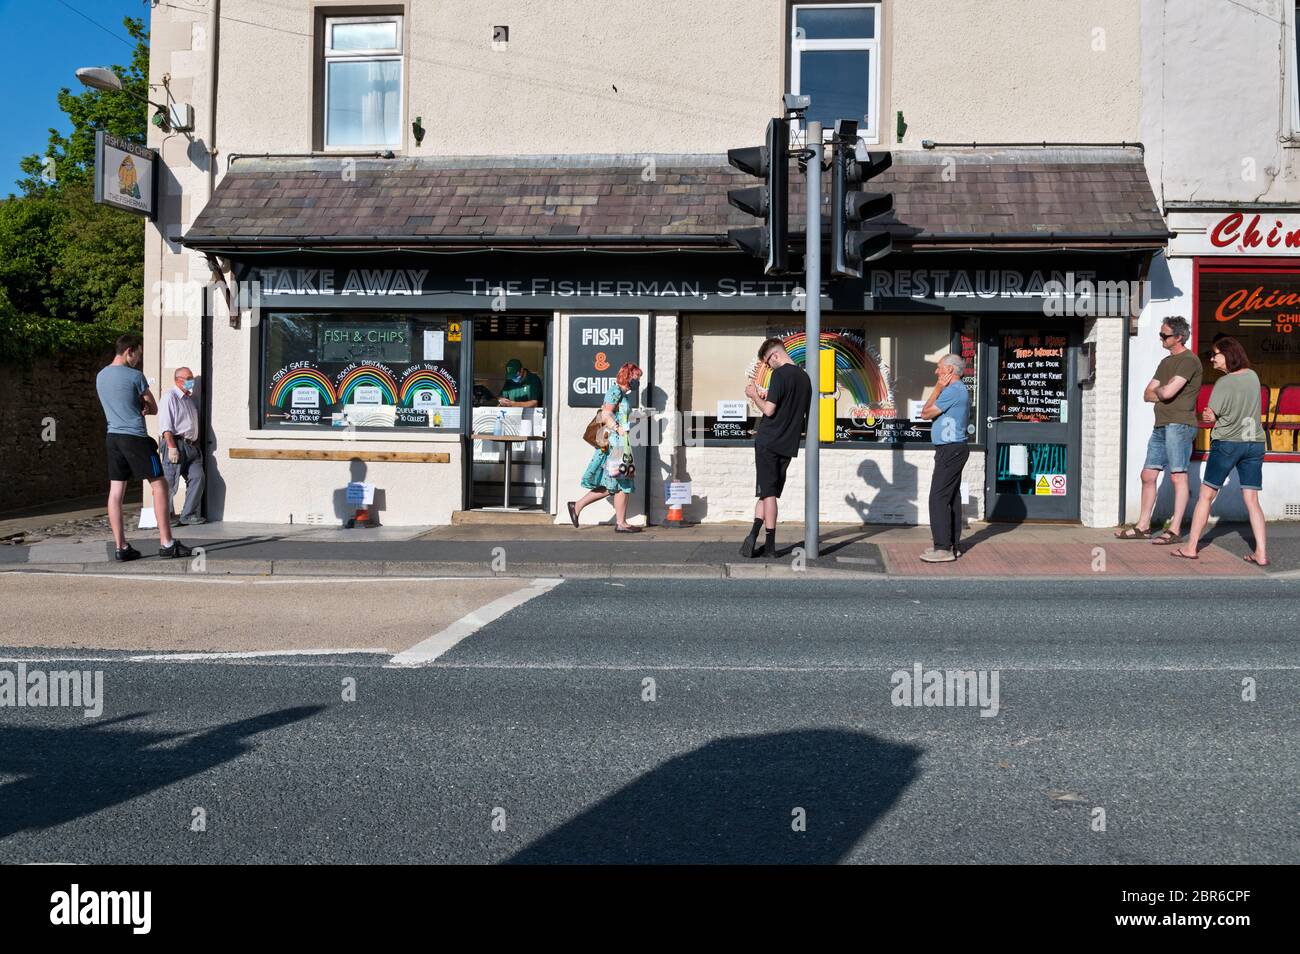 Settle, North Yorkshire, UK. 20th May 2020. Social distancing as people queue at a fish and chip shop, Settle, North Yorkshire, as a result of the Covid-19 restrictions. The instructions in the shop window say to queue on the right to order and then queue on the left to collect. Credit: John Bentley/Alamy Live News Stock Photo